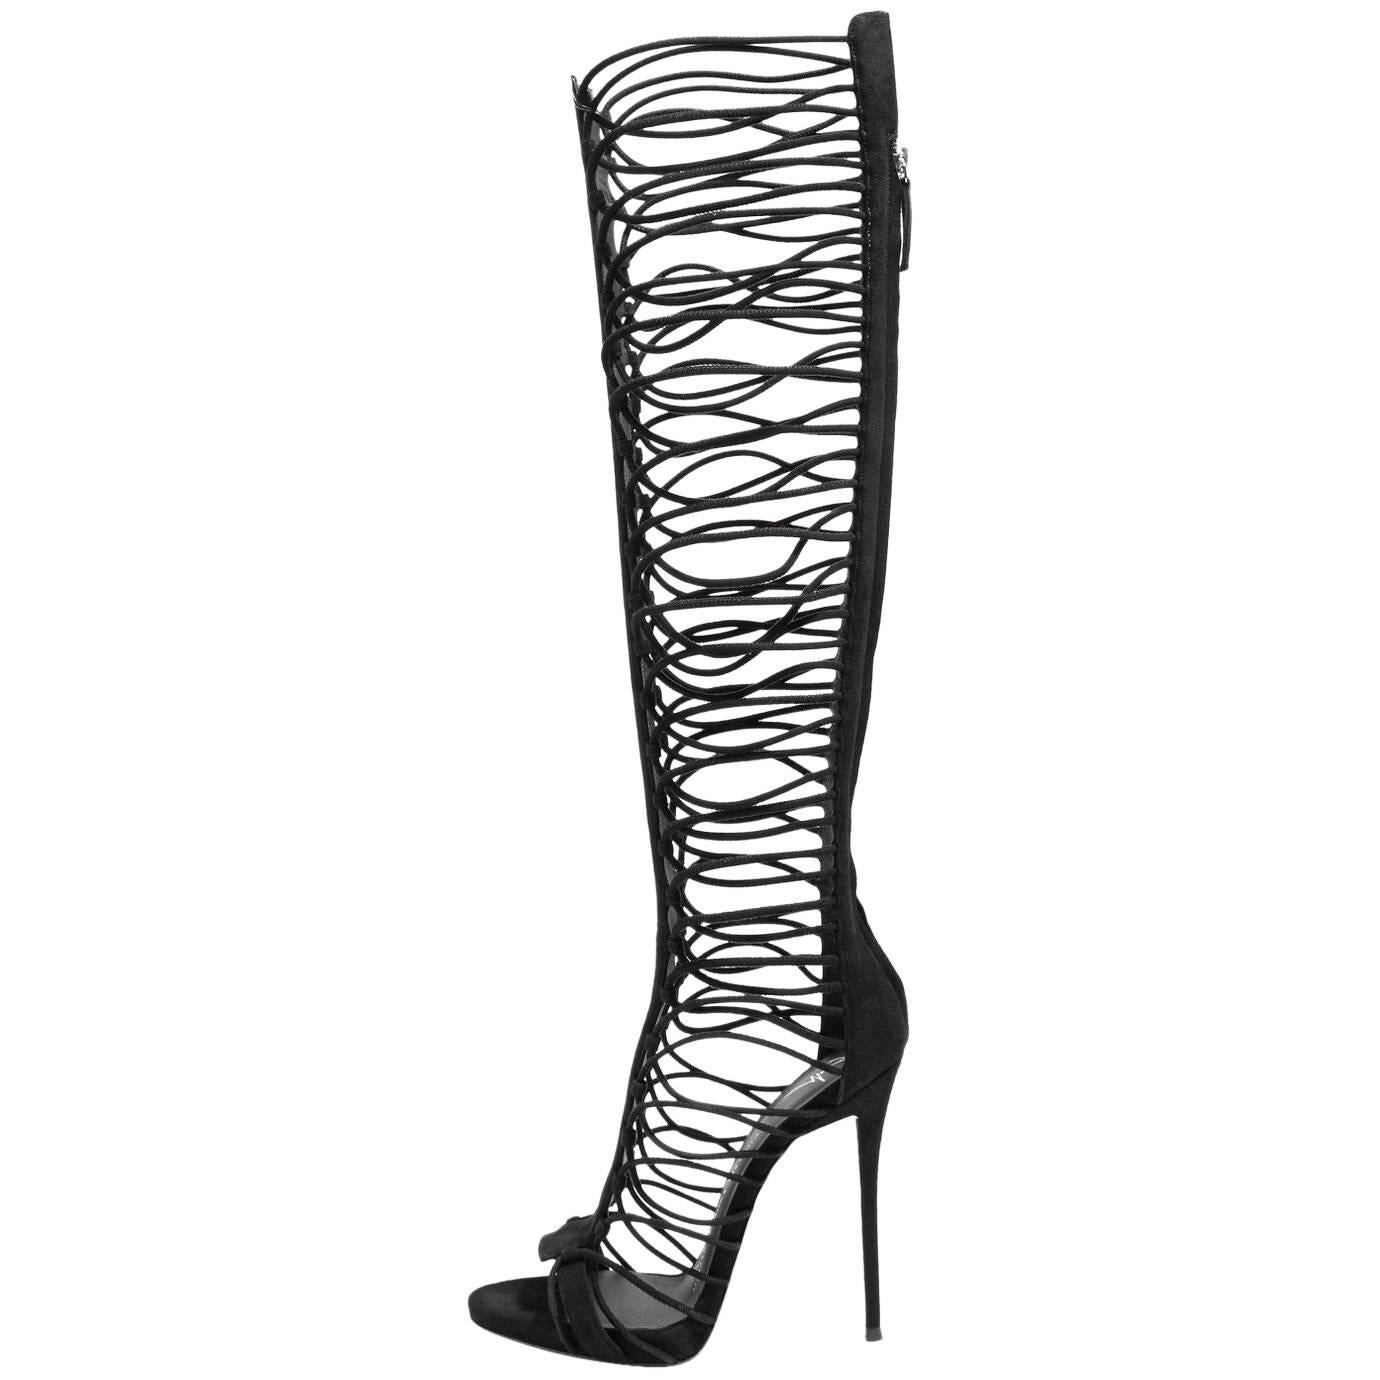 Giuseppe Zanotti New Black Suede Cut Out Knee High Boots W/Box